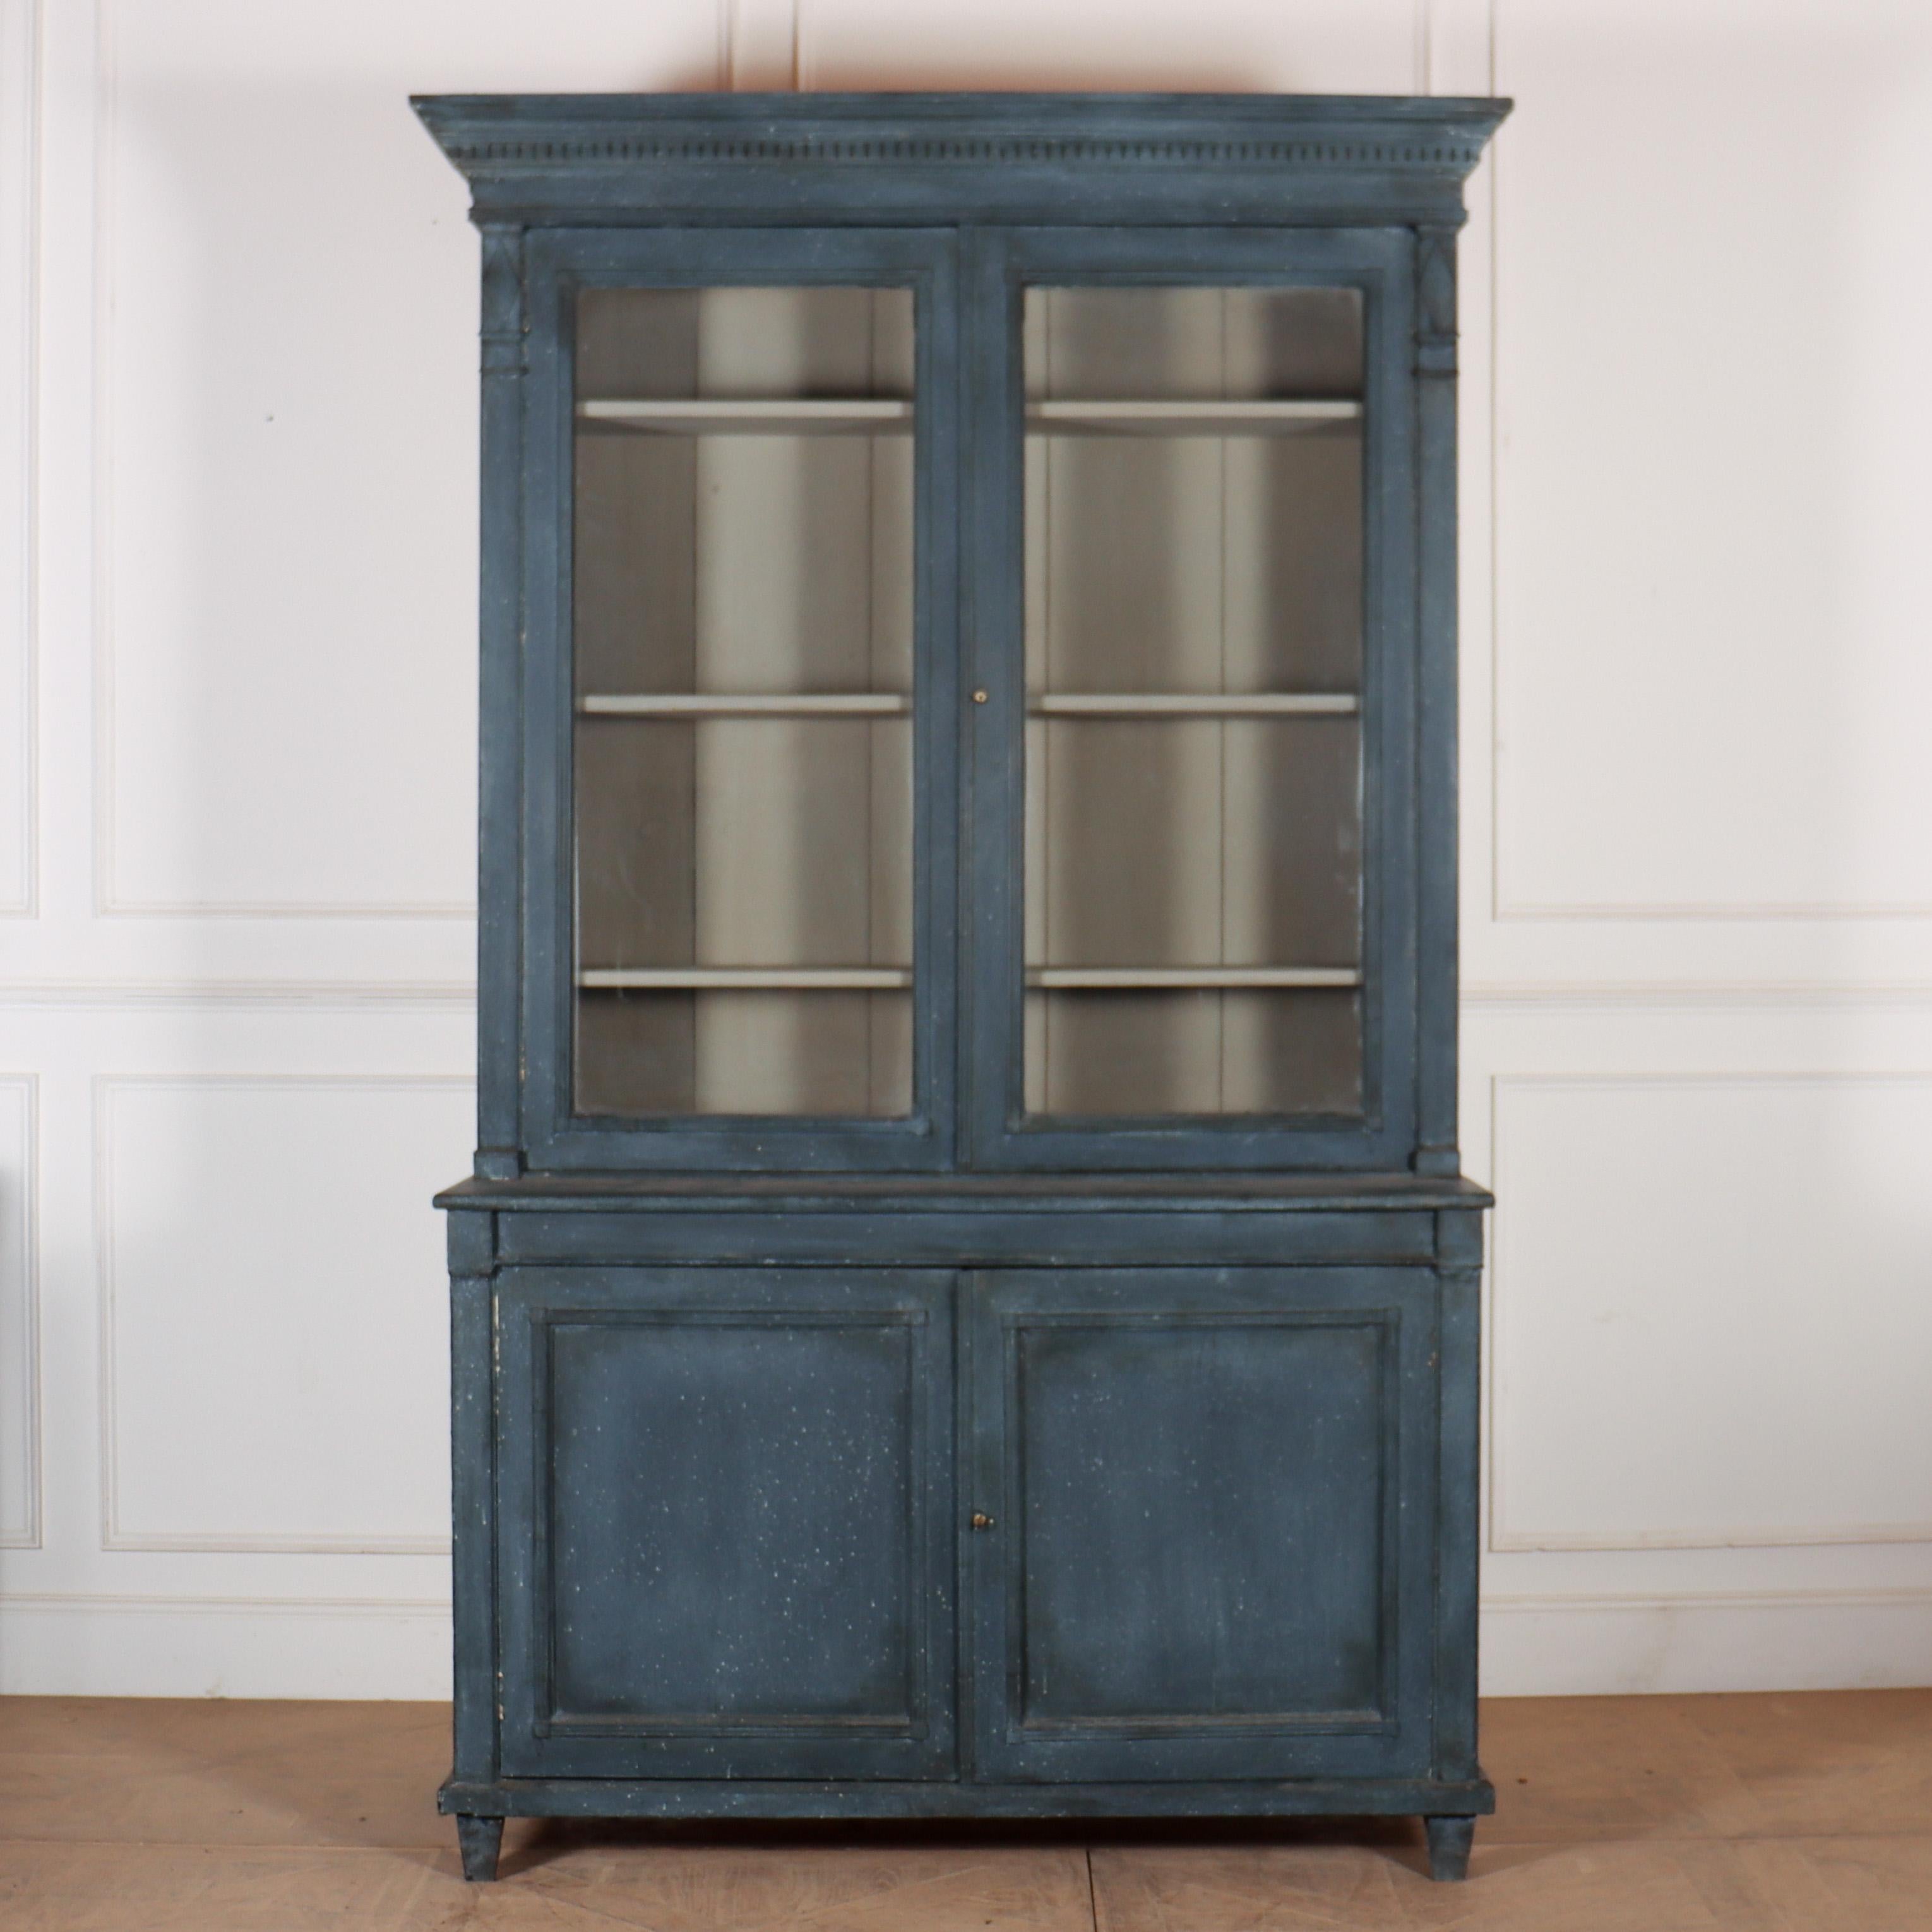 Wonderful pair of early 19th C French glazed bookcases. 1830.

Reference: 8022

Dimensions
61 inches (155 cms) Wide
25 inches (64 cms) Deep
98 inches (249 cms) High